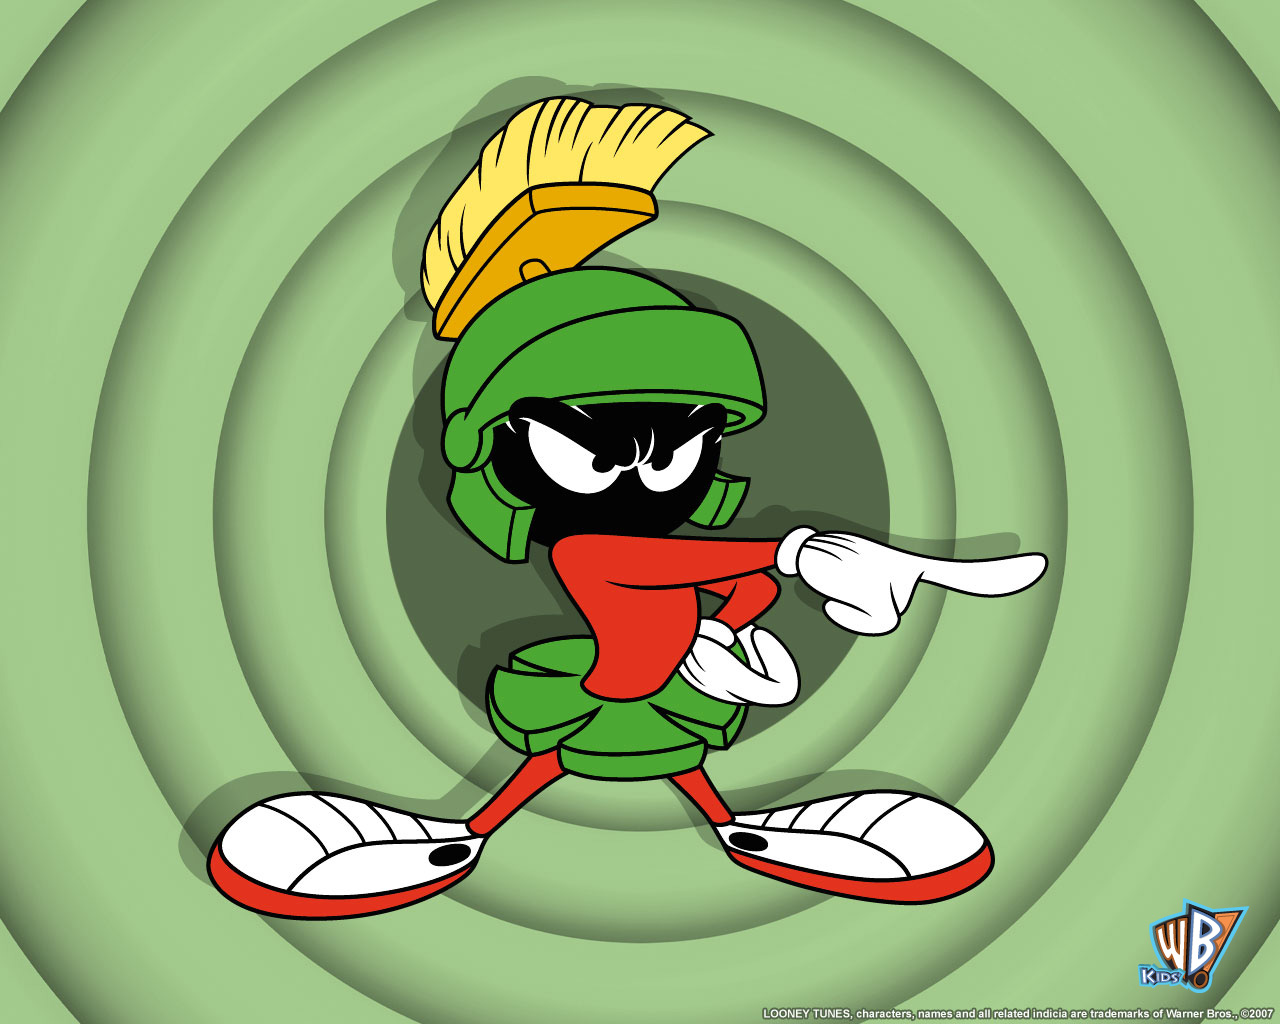 Marvin The Martian Backgrounds, Compatible - PC, Mobile, Gadgets| 1280x1024 px